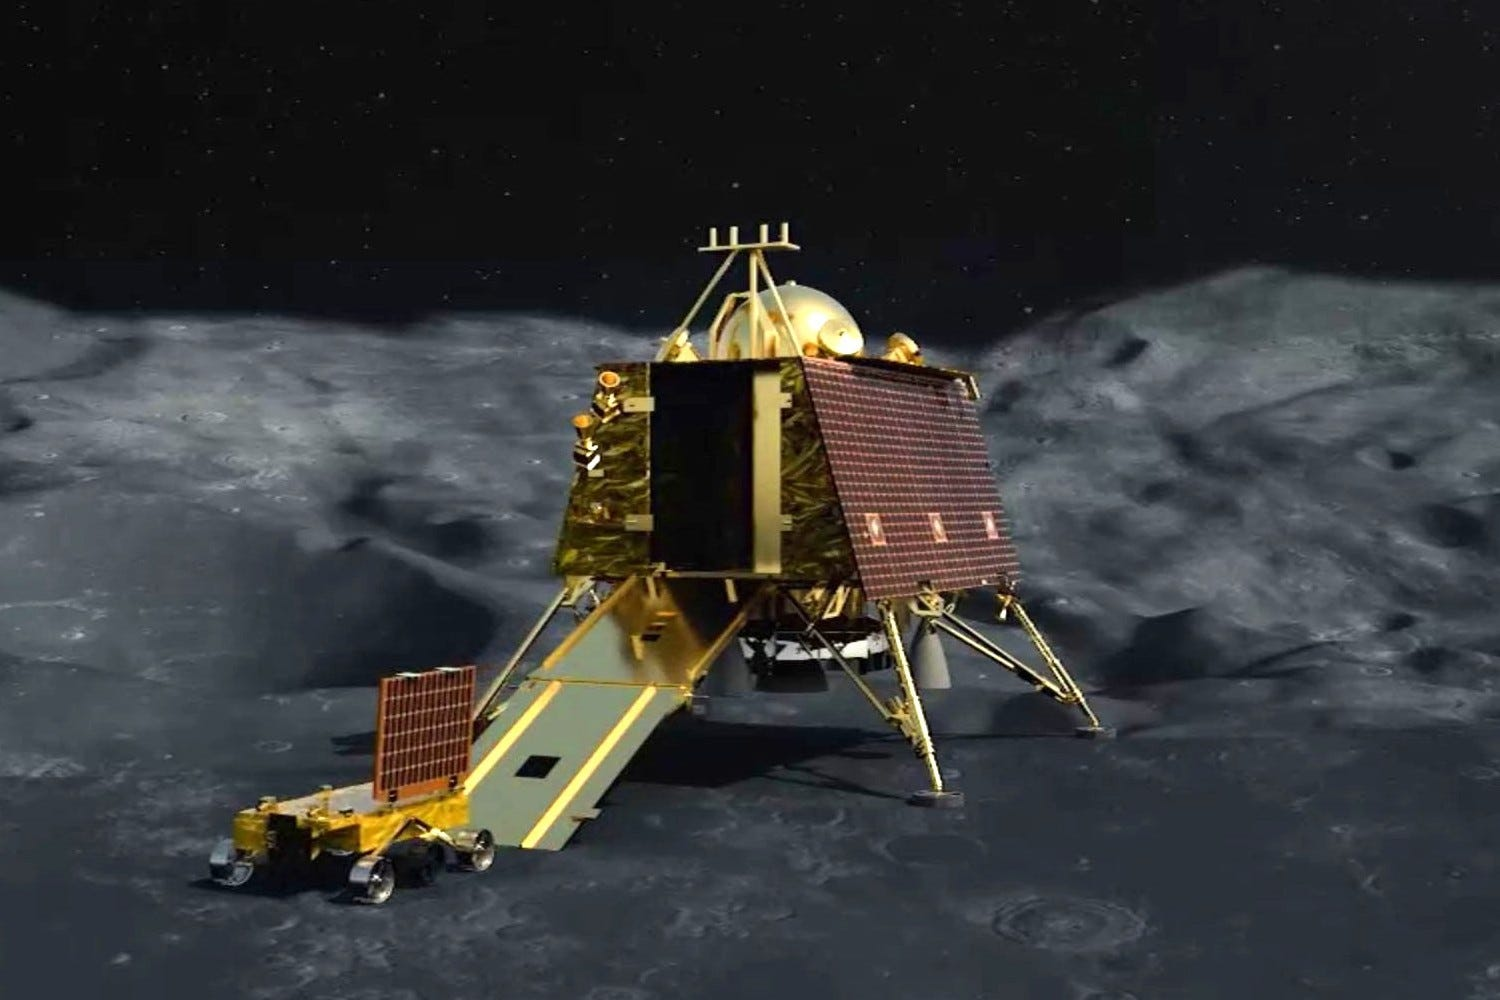 Journey of Chandrayaan 3 : We Indians are on the moon